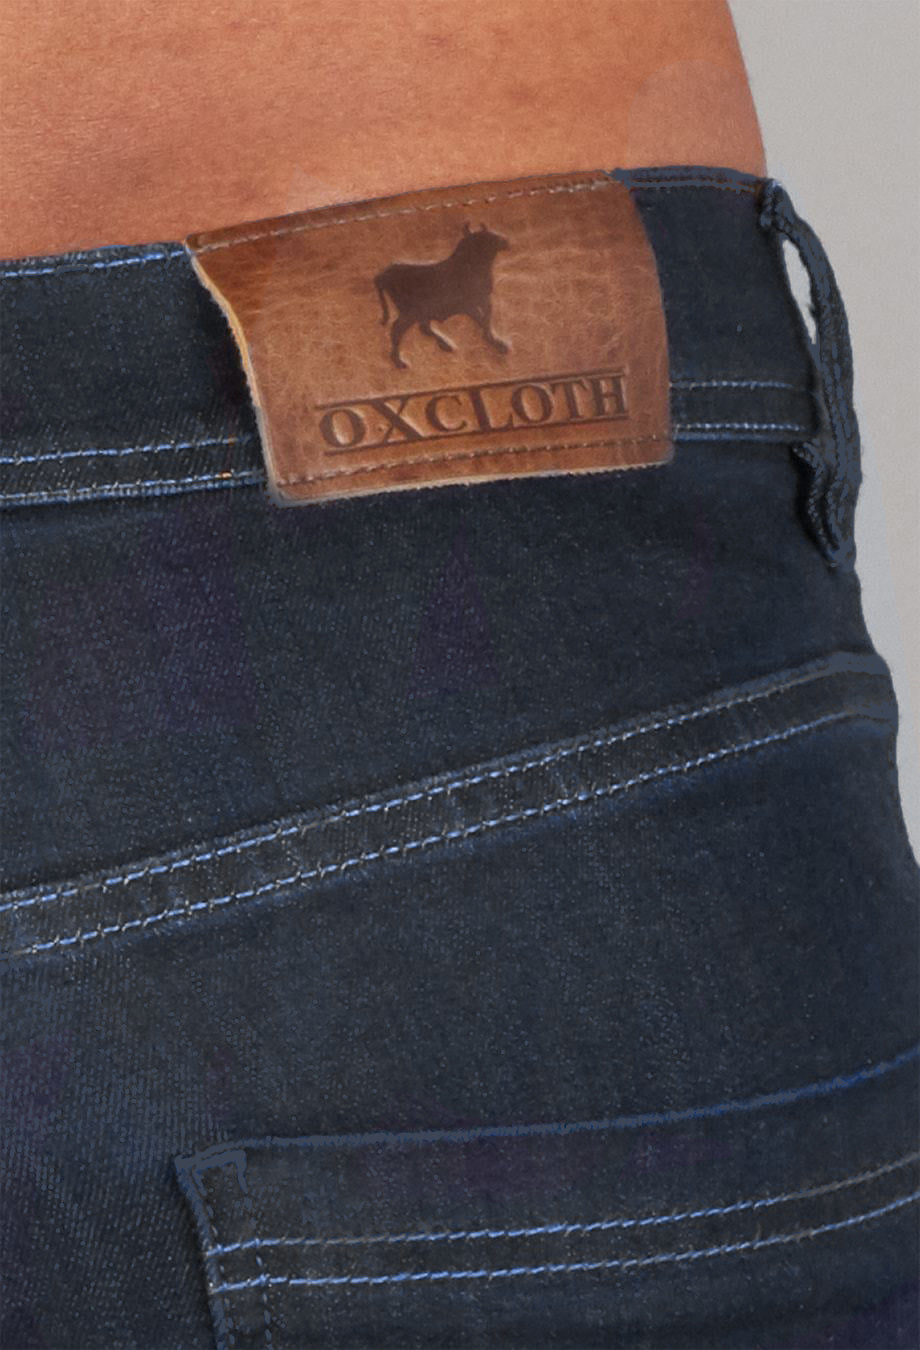 Bluejay Athletic Fit Stretch Jeans - 74.99 - Oxcloth - Bottoms muscle-fit for bodybuilders and athletes